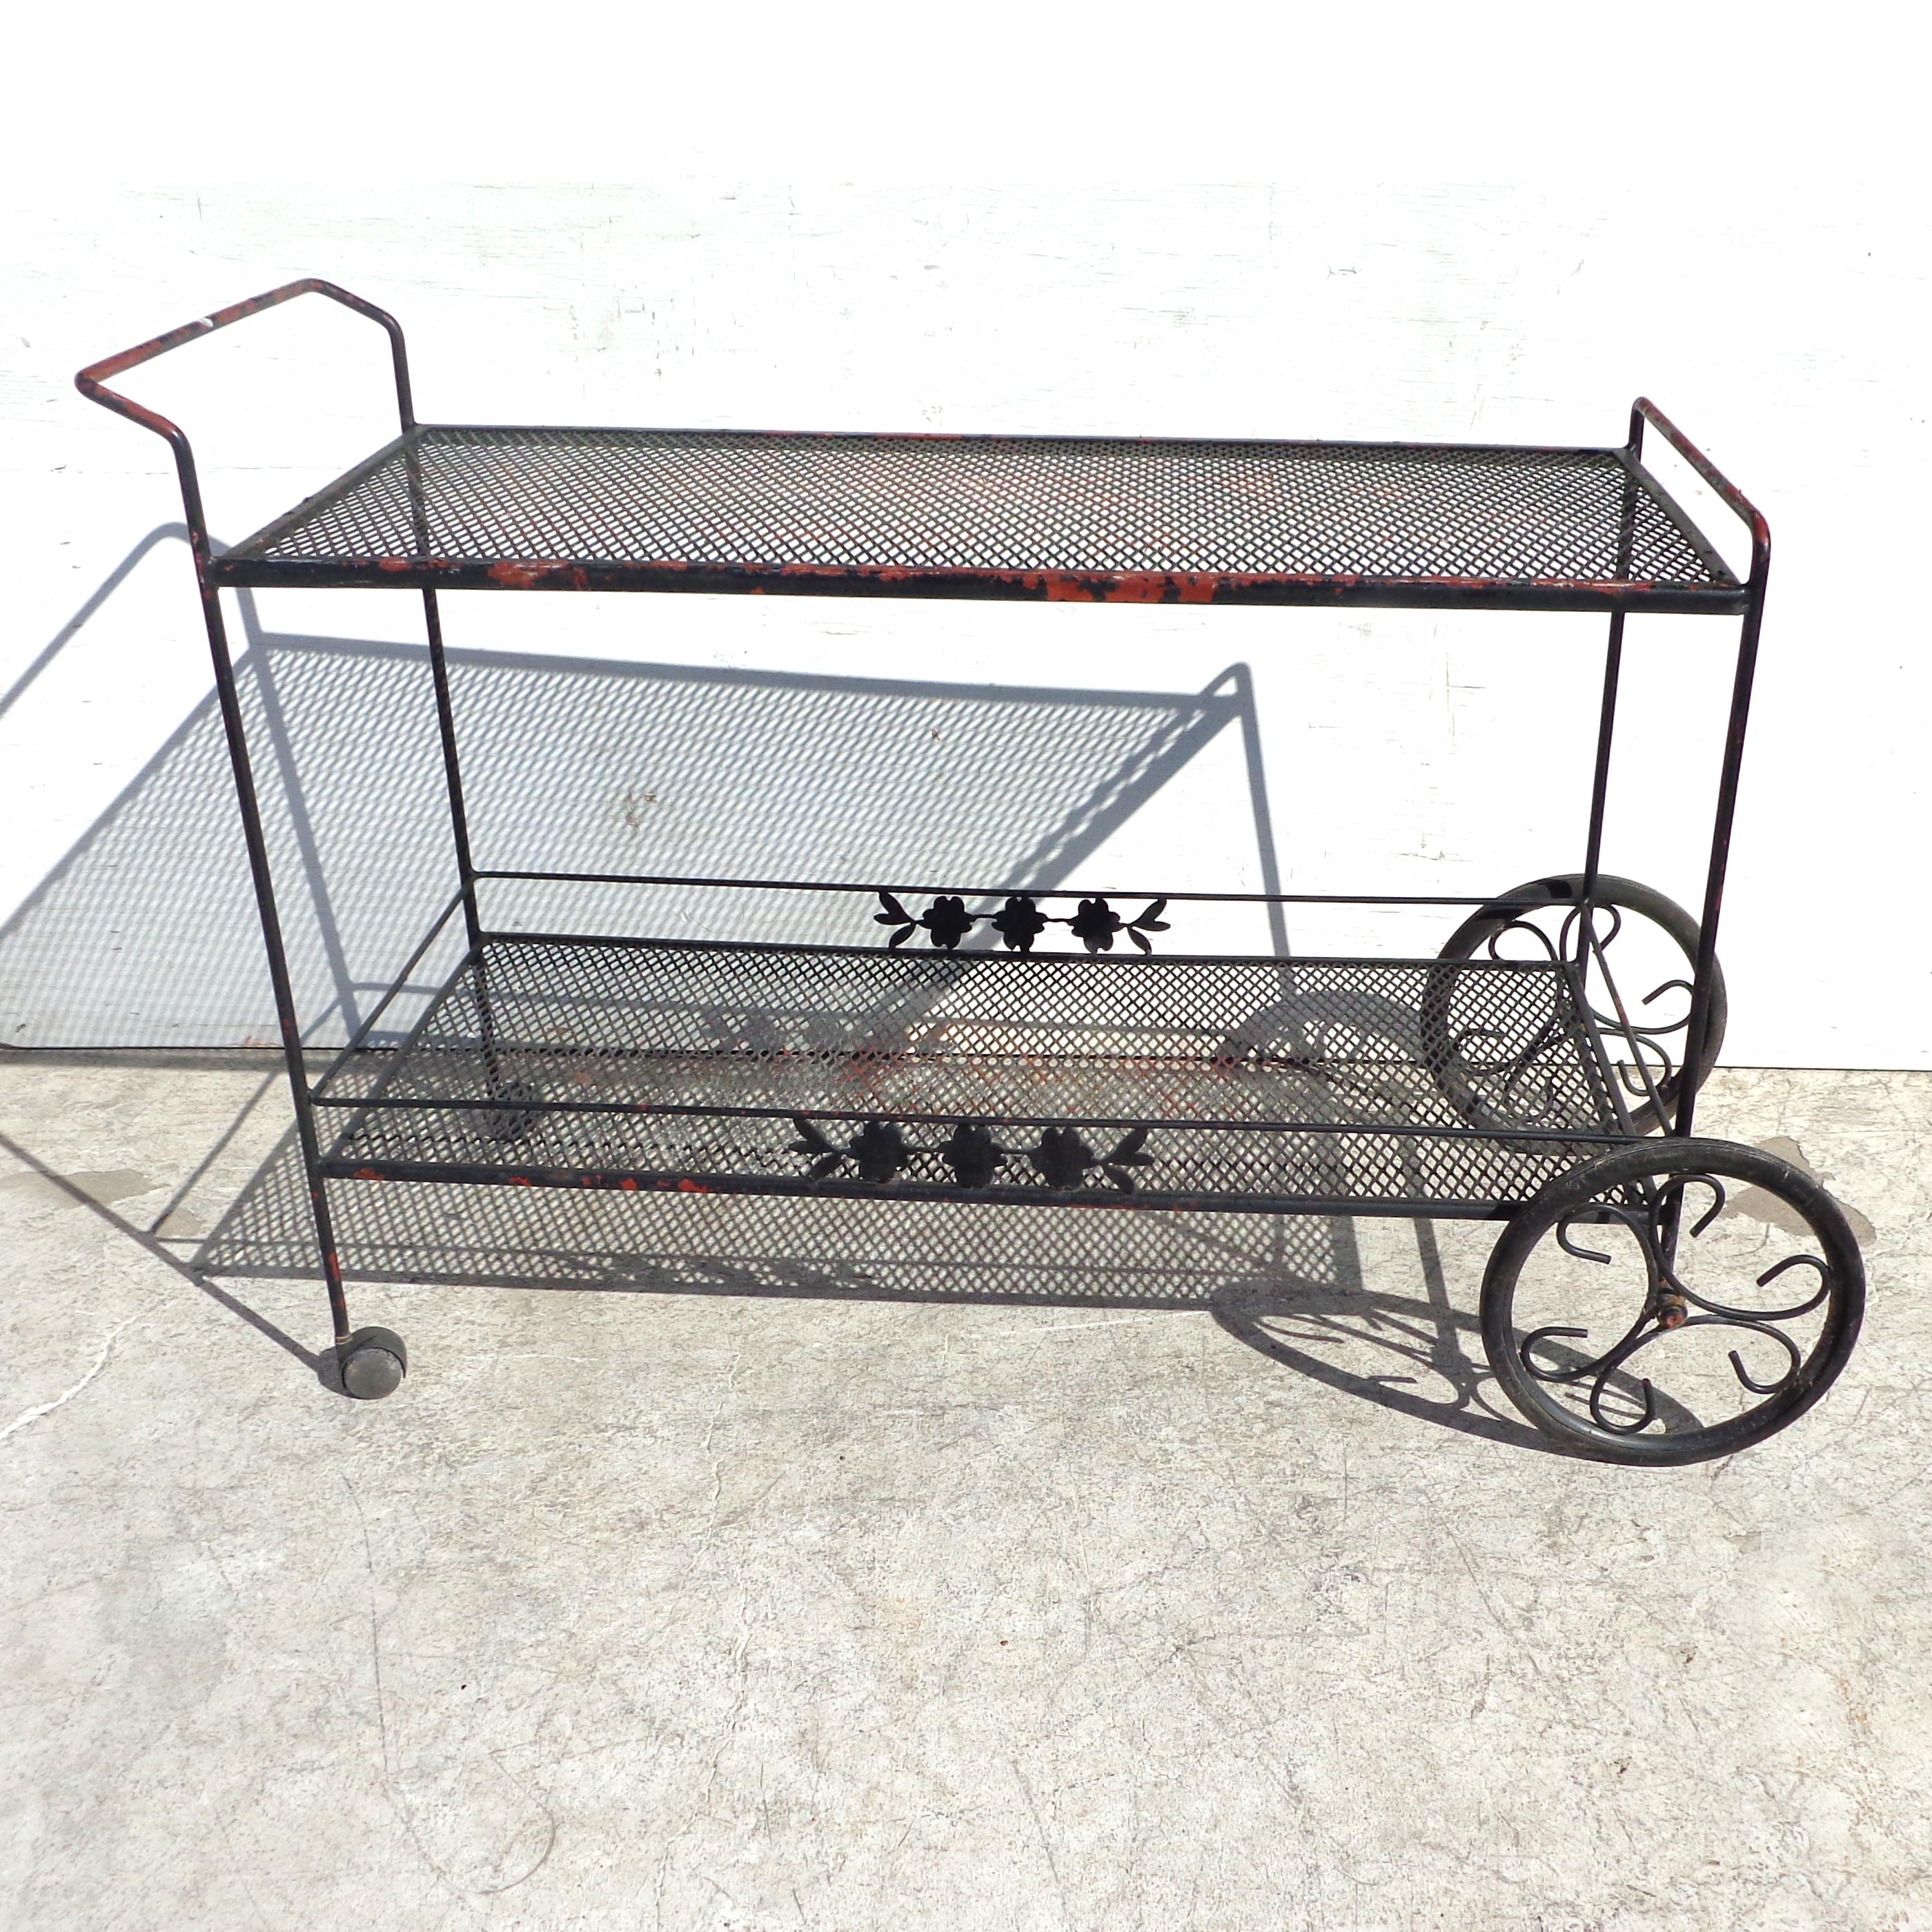 Woodard style wrought iron bar serving cart
 
2 tier mid-century metal bar cart by Woodard.
Wheels for mobility.
Measures: 48